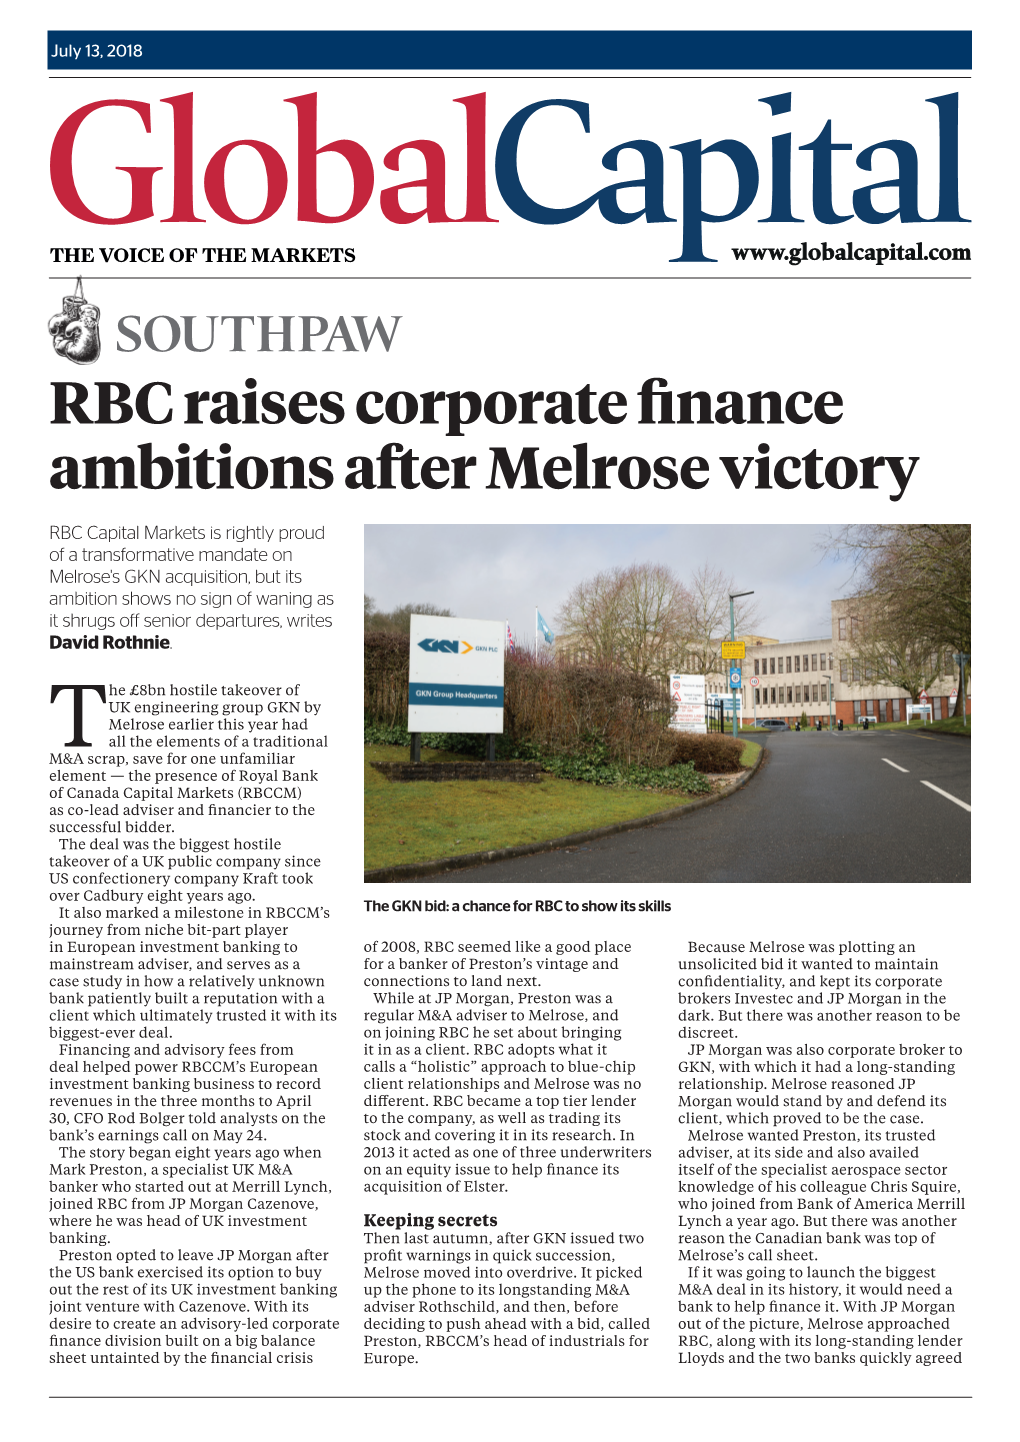 RBC Raises Corporate Finance Ambitions After Melrose Victory